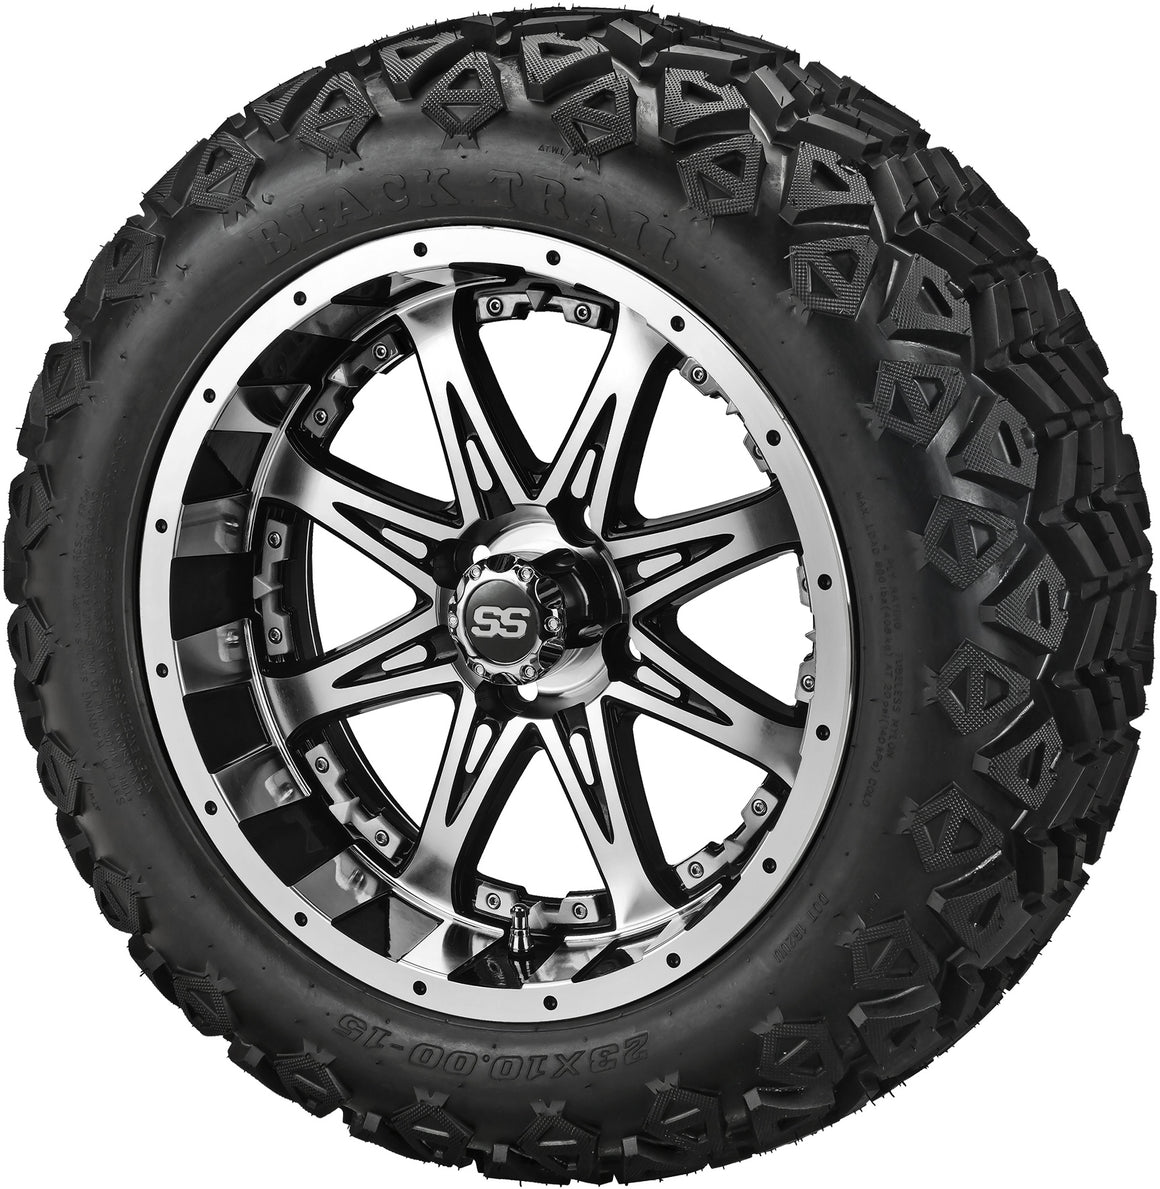 15" Revenge Black/Machined w/Colored Inserts on 23x10.00-15 Black Trail Tires Combo